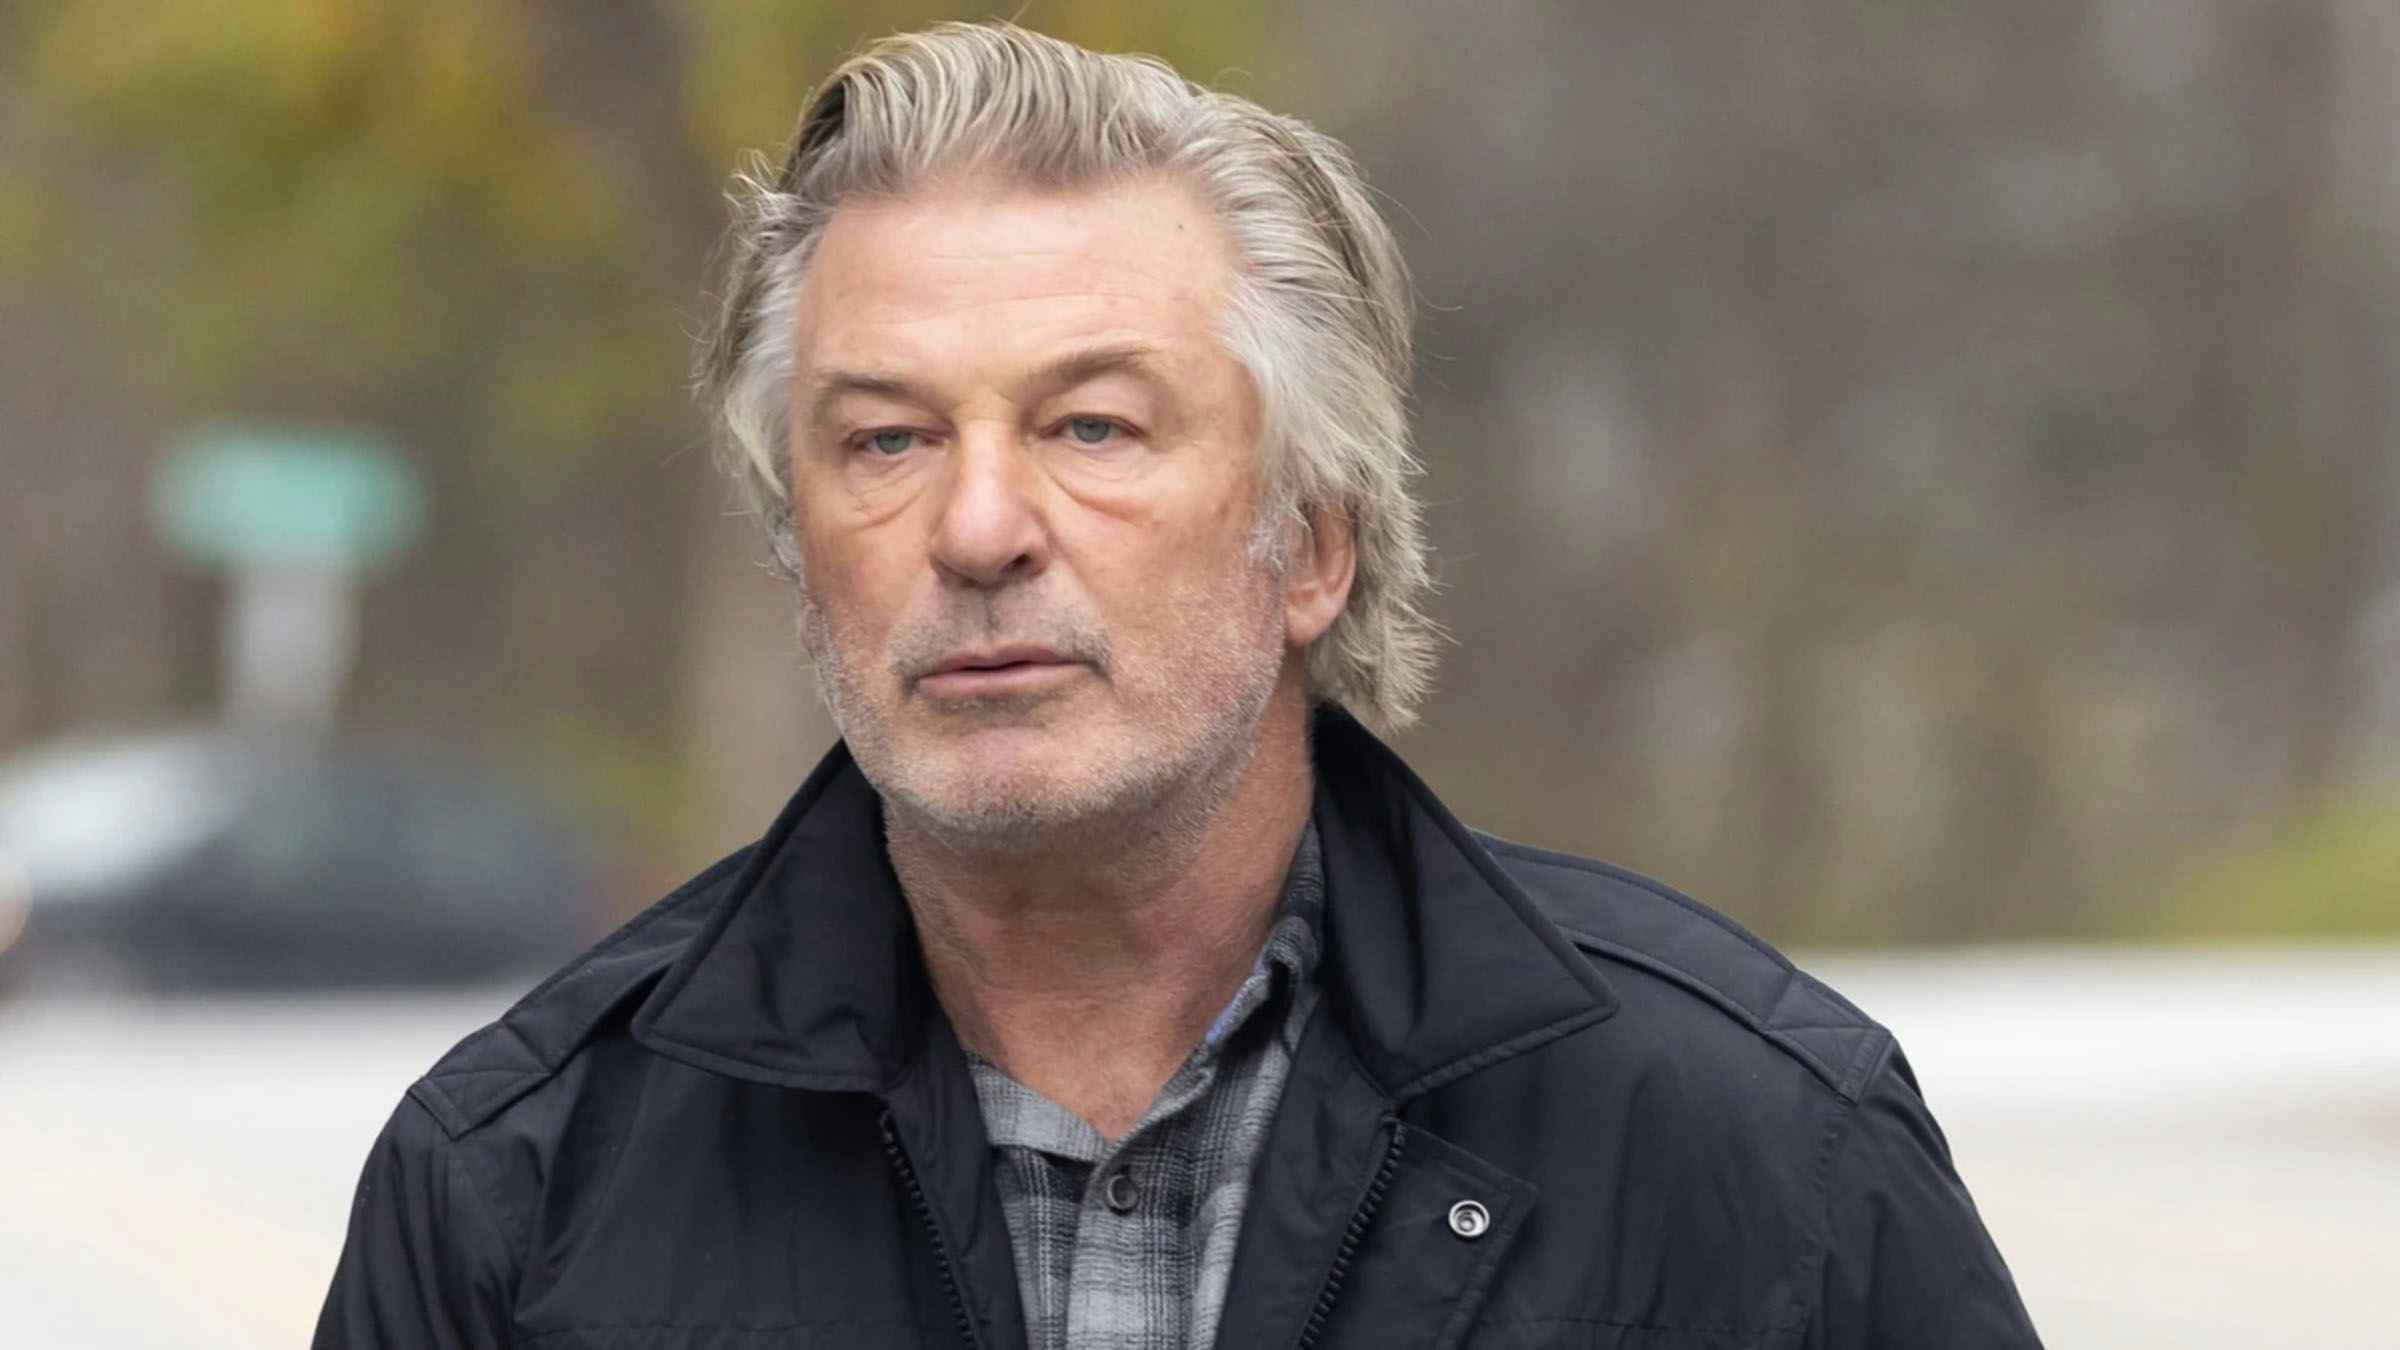 Alec Baldwin, 'Rust' film crew charged with involuntary manslaughter for 2021 shooting